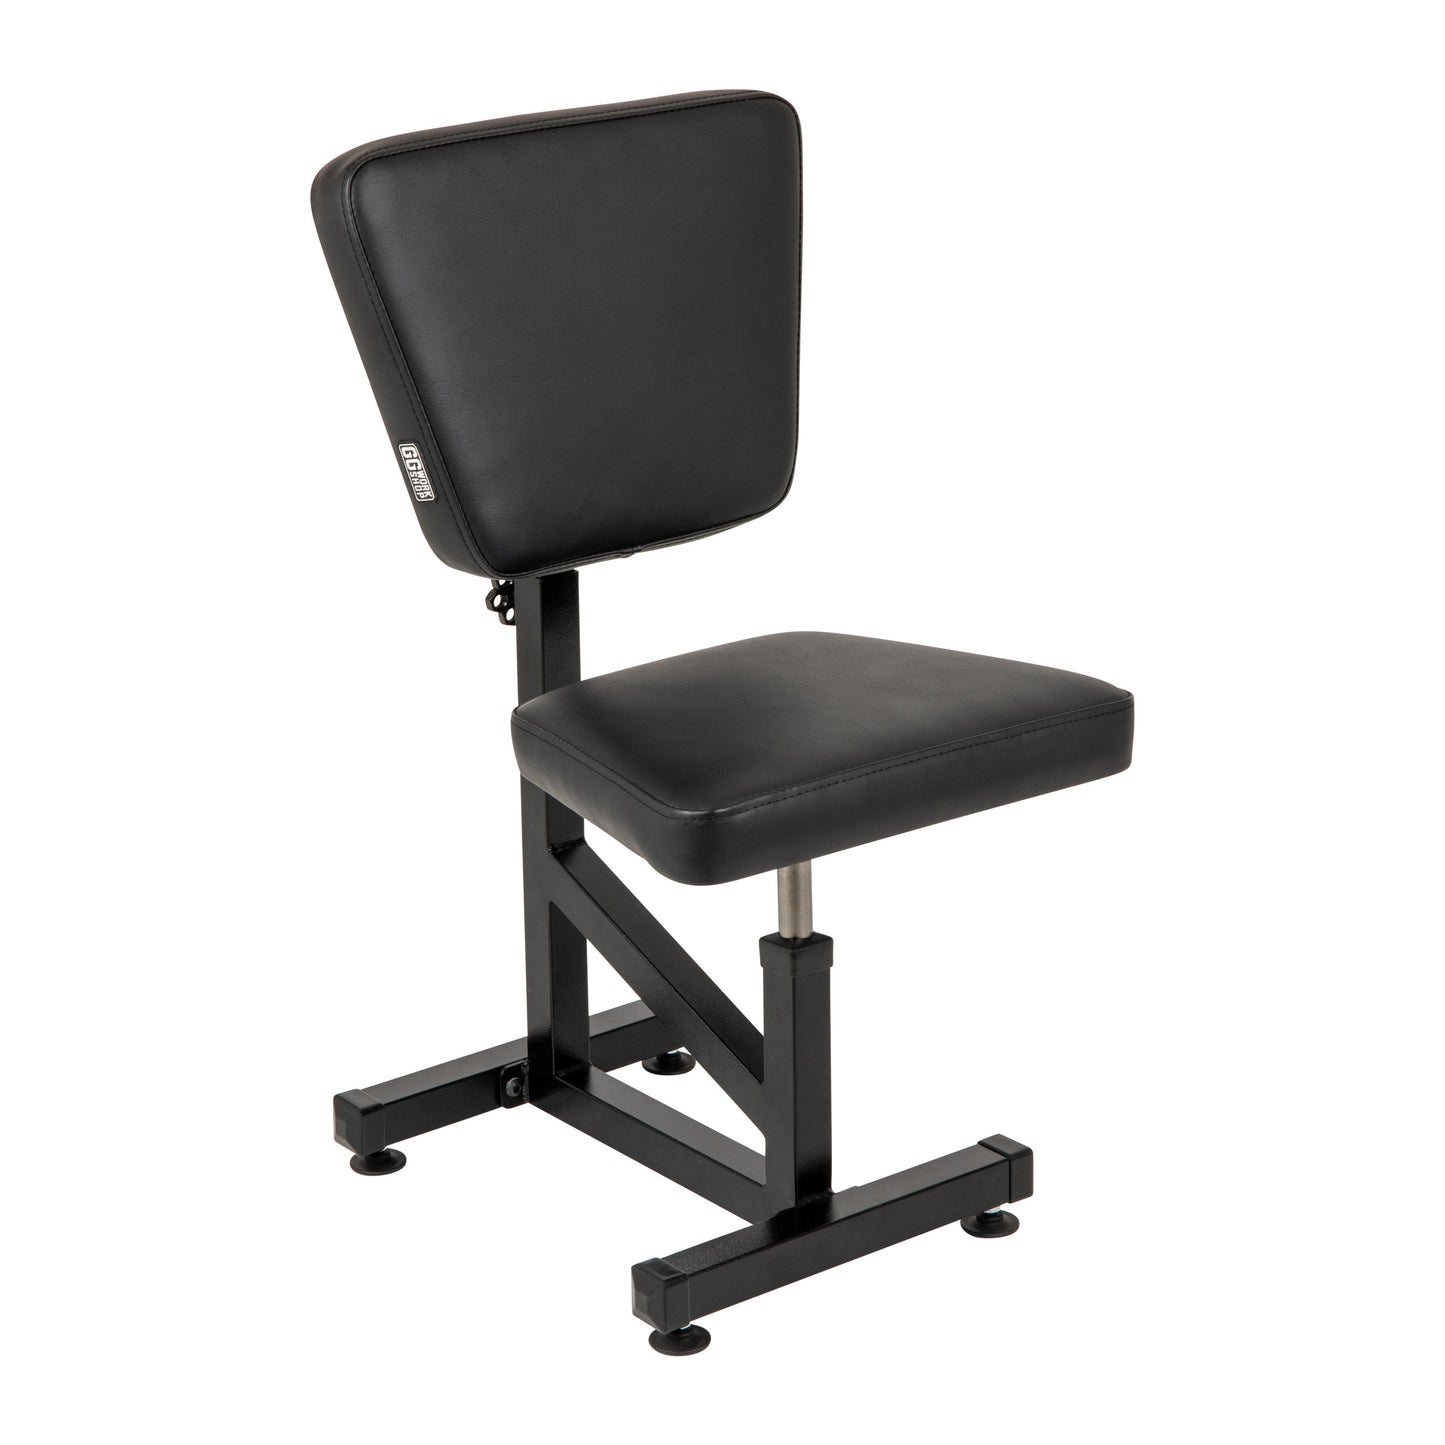 MULTIFUNCTIONAL SWIVEL CHAIR WITH ARMREST